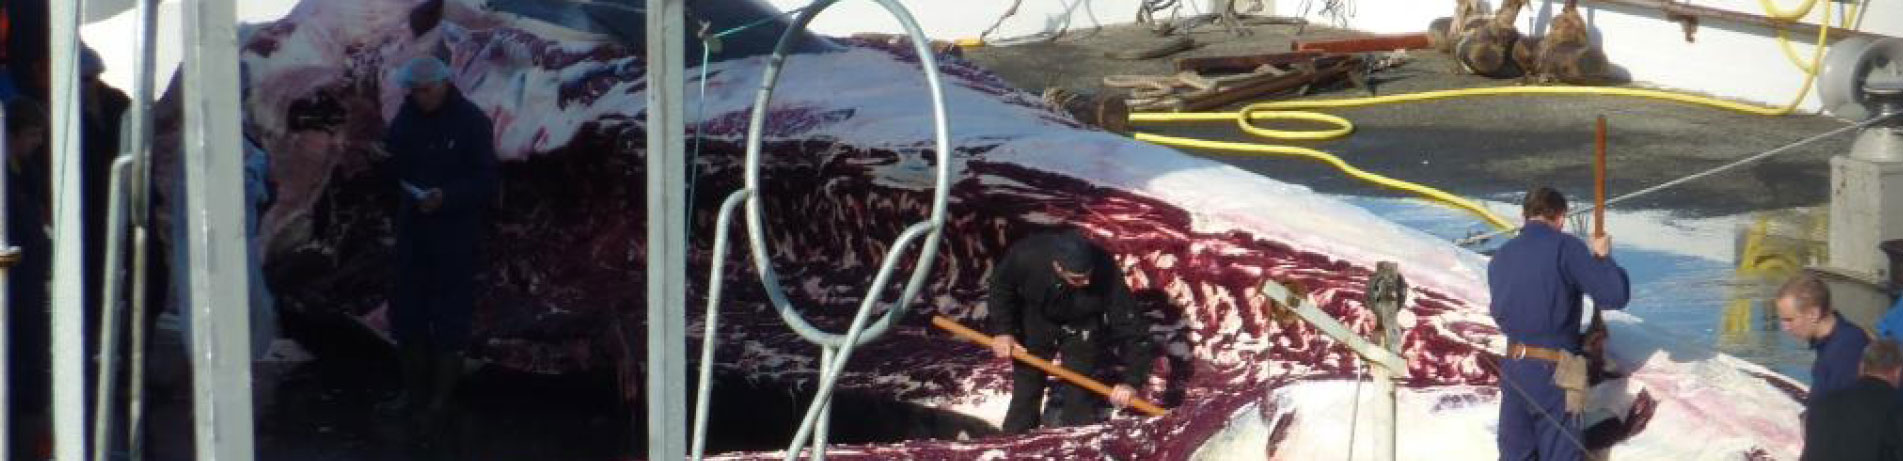 Workers butchering a fin whale at Miosandur whaling station, Hvalfjordur, Iceland (August 2014)